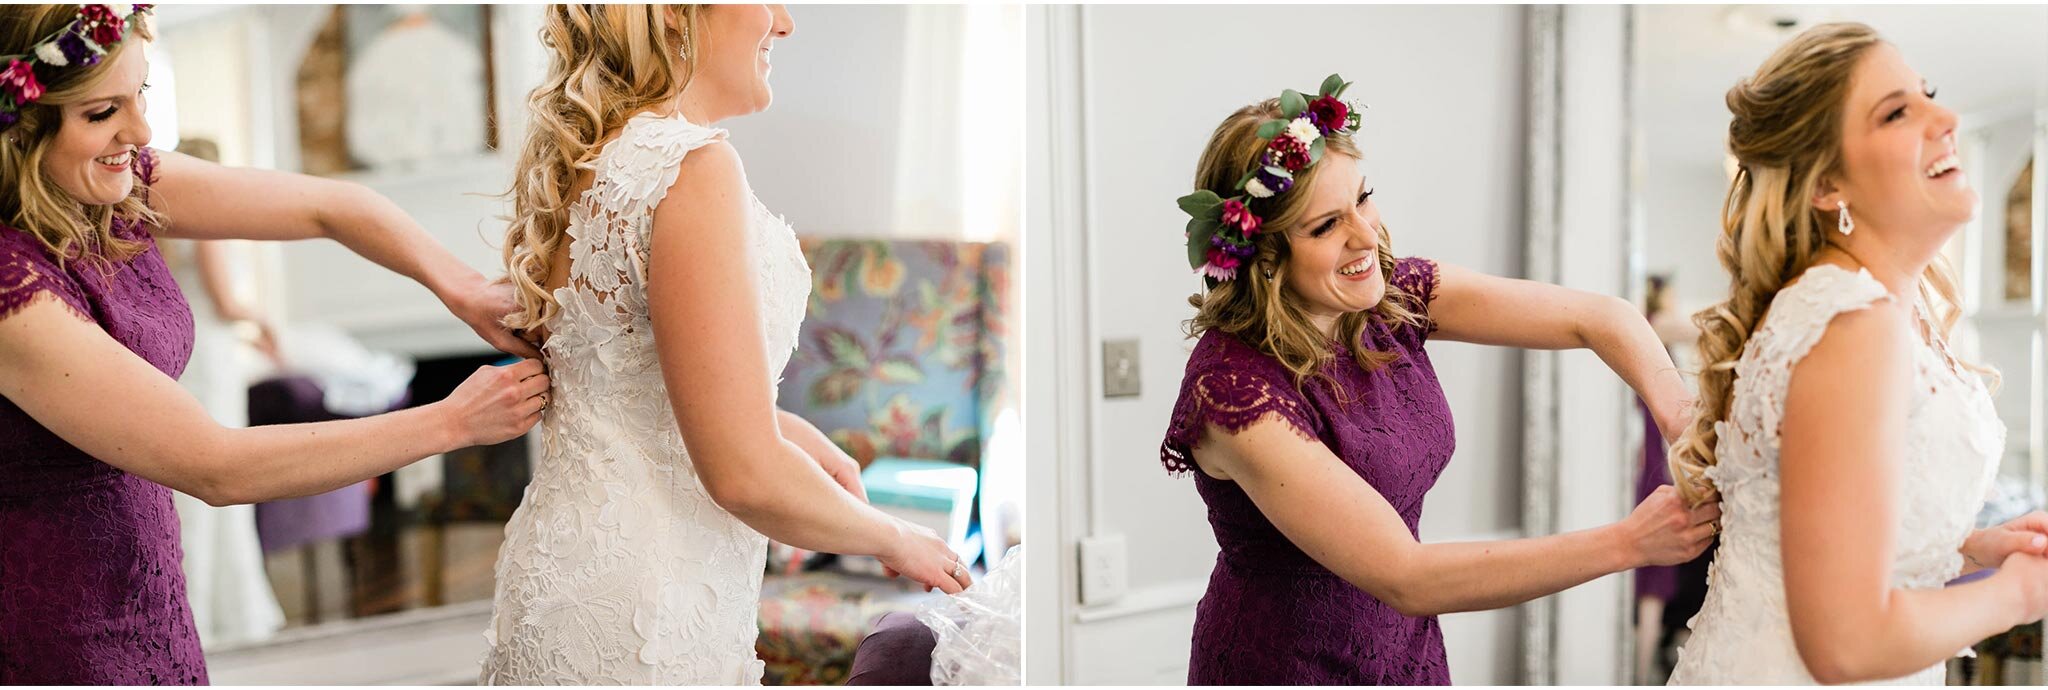 Durham Wedding Photographer | By G. Lin Photography | Bride getting ready with bridesmaid